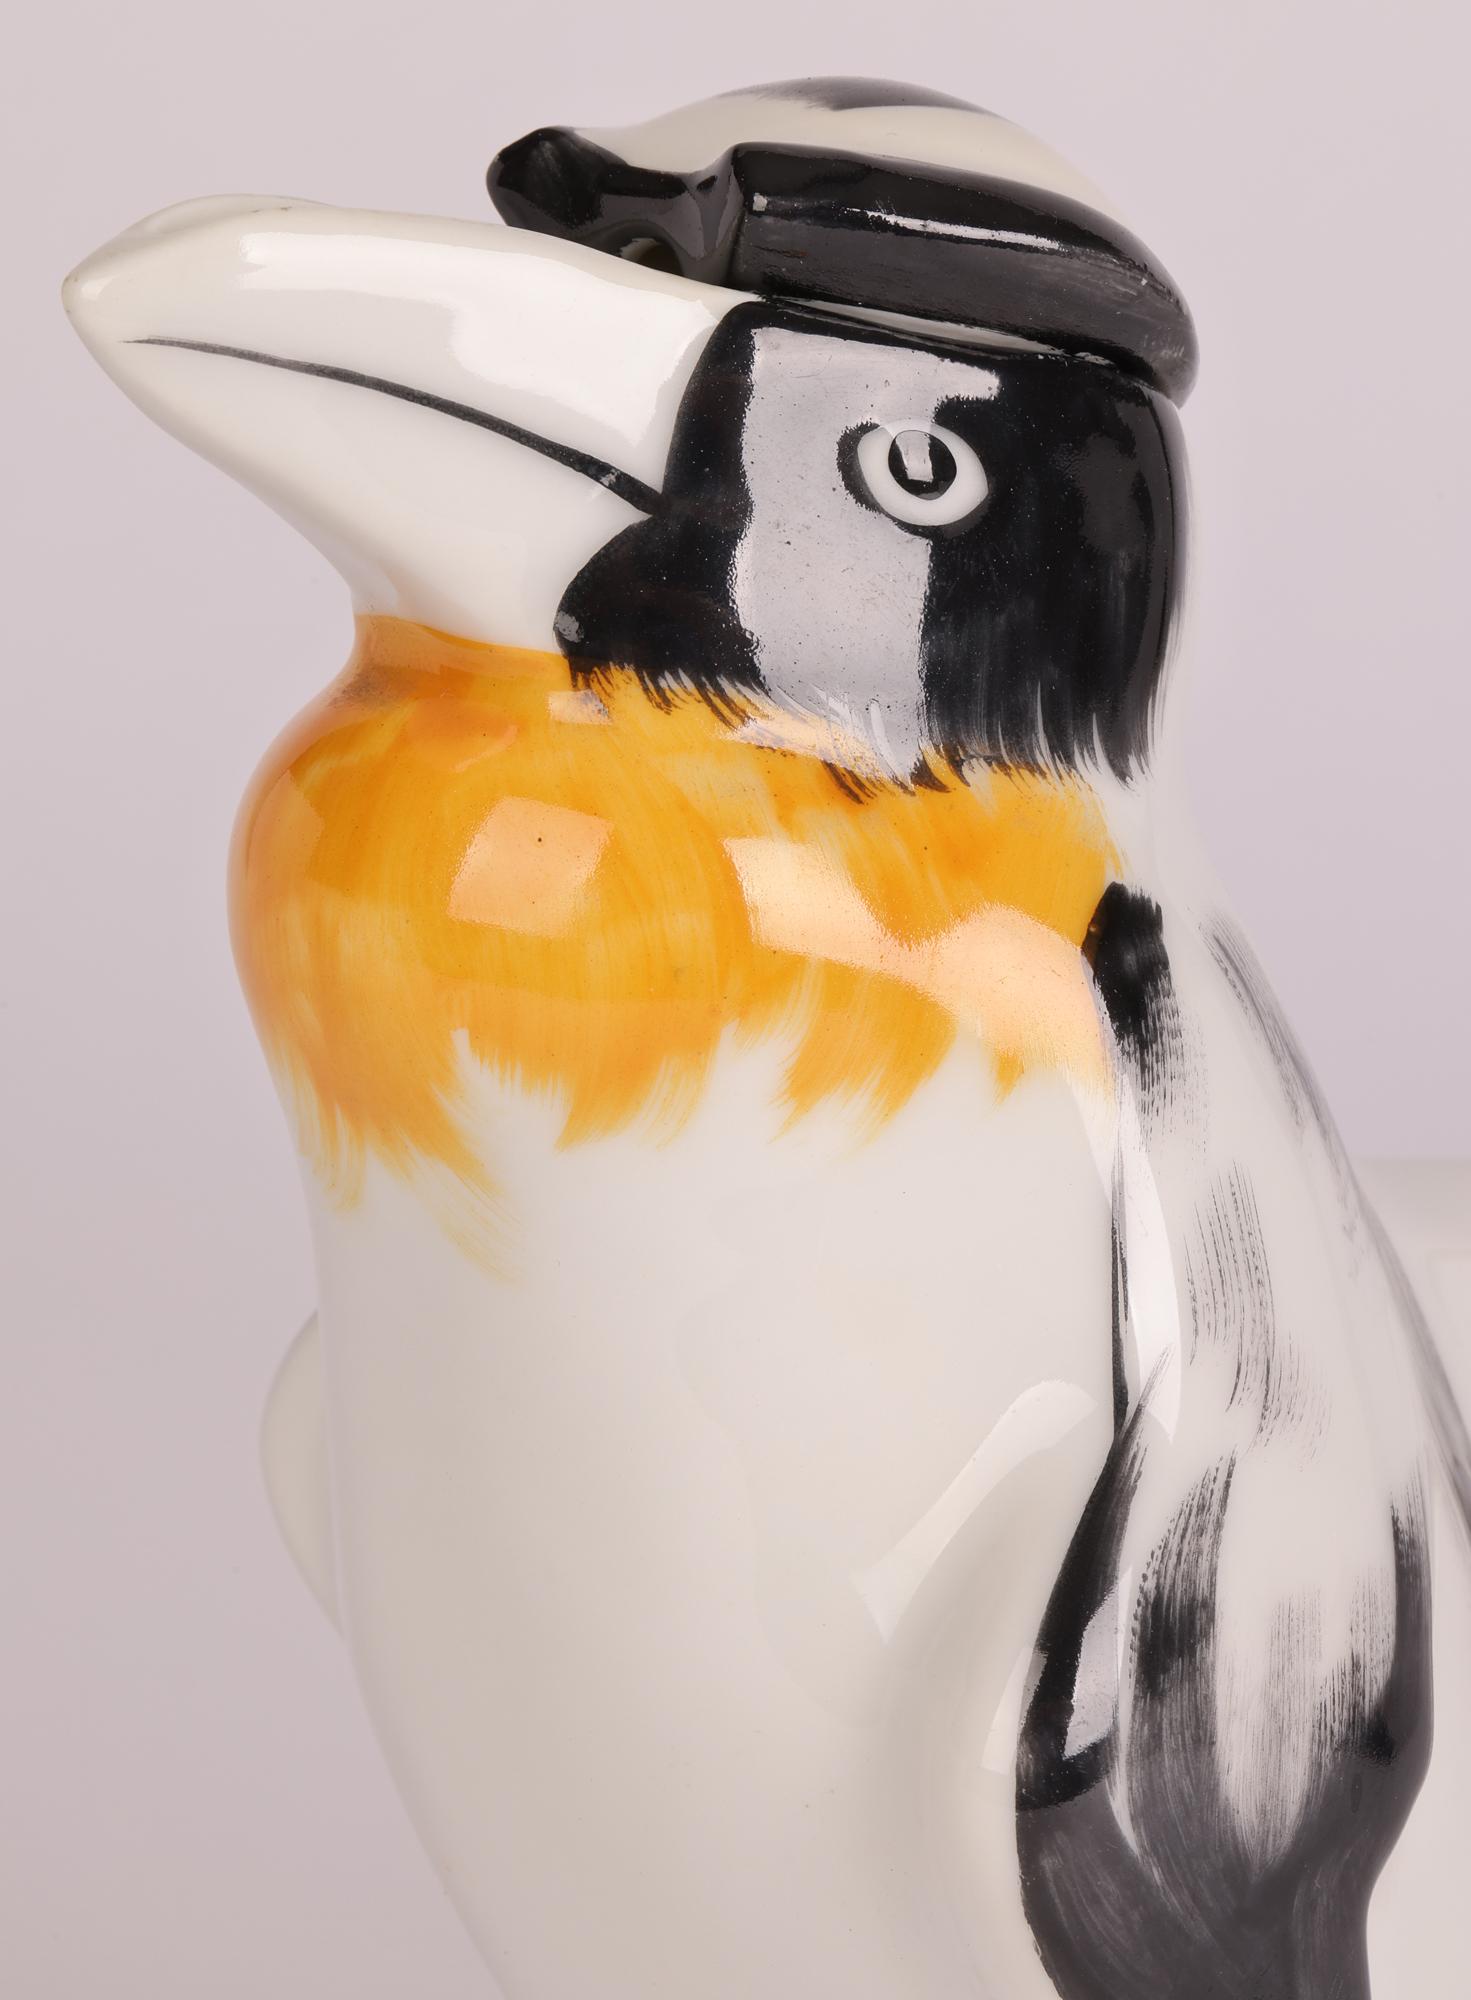 A rare and unusual French Theodore Havilland Limoges penguin shaped porcelain teapot designed by renowned Swiss sculptor Edouard-Marcel Sandoz (Swiss, 1881-1971) and dating from around 1930. The body of the teapot is shaped as a penguin with its